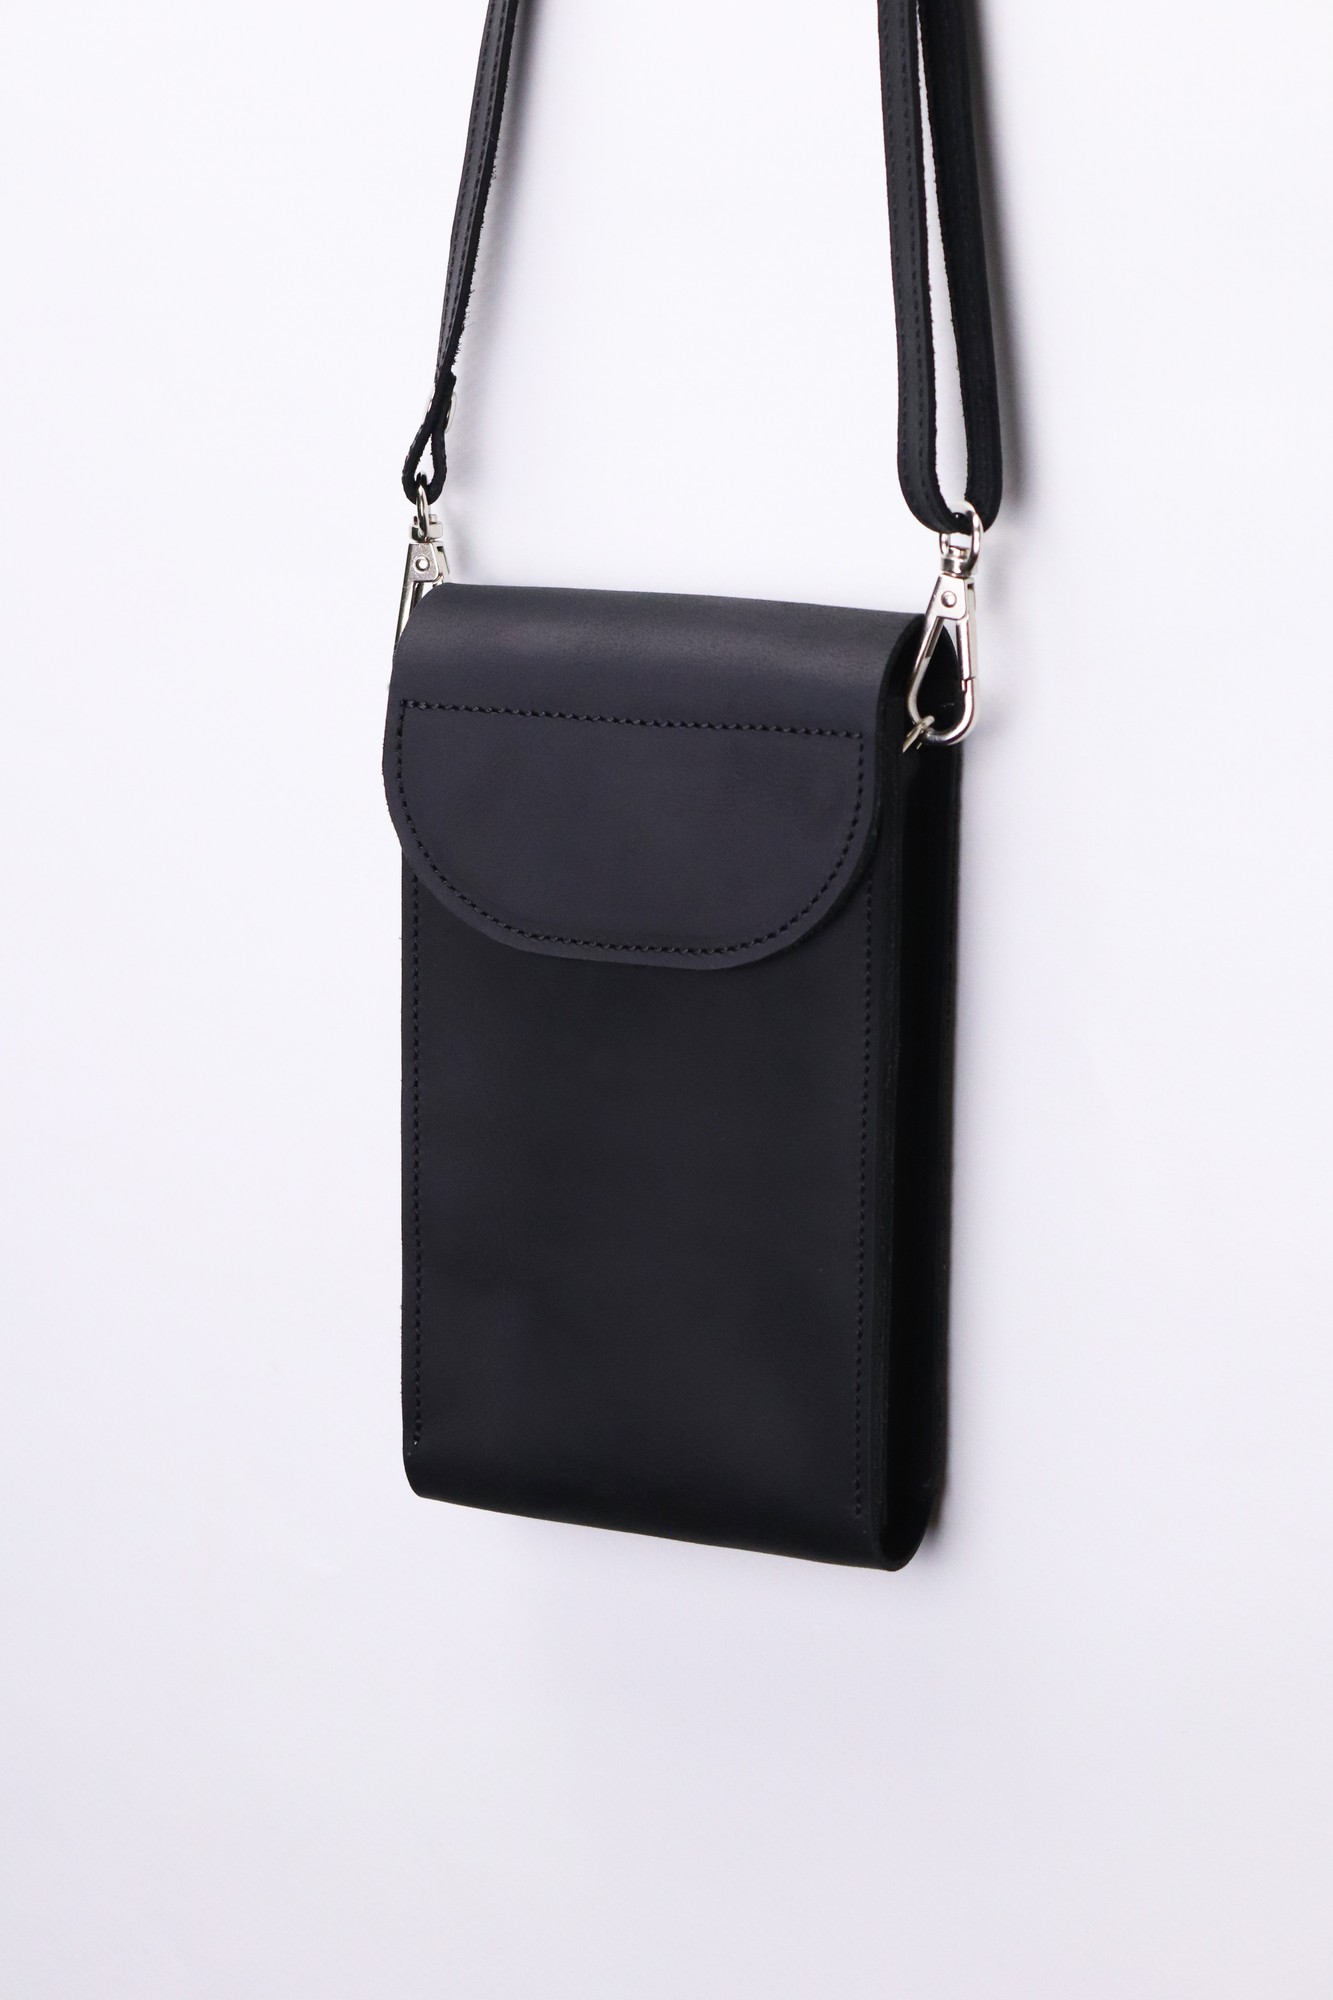 Handmade casual small bag for smartphone with shoulder strap / Black - 1002